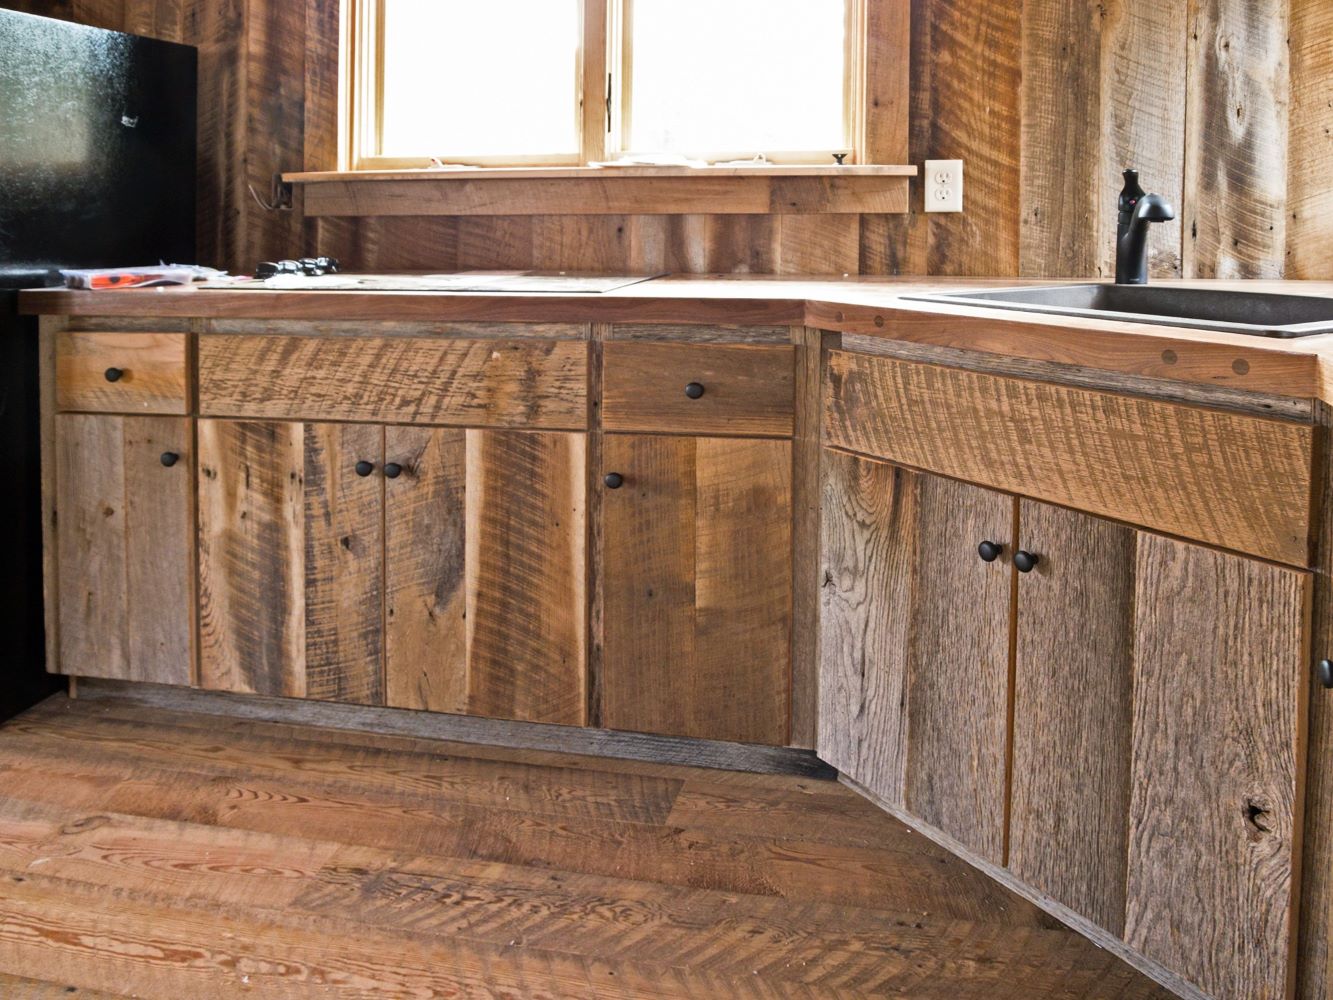 How to Build Rustic Barnwood Kitchen Cabinets